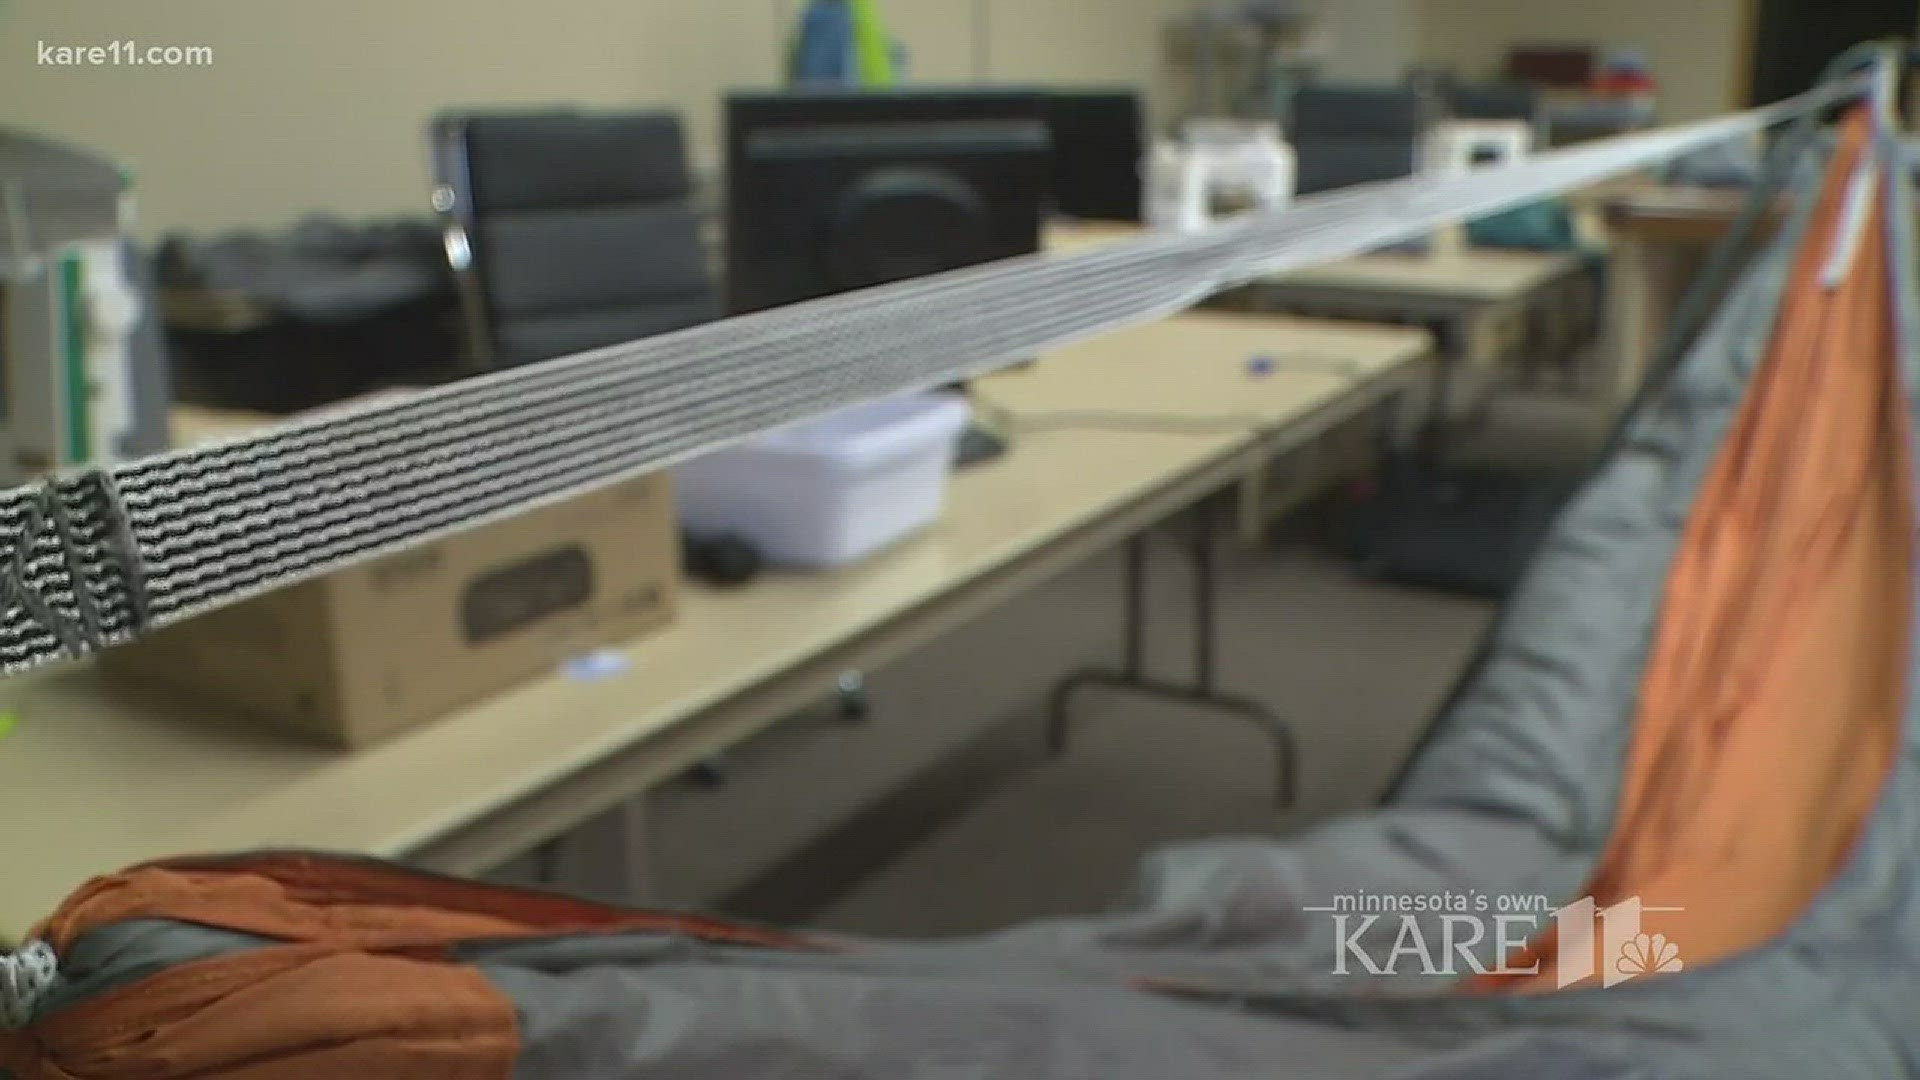 A Twin Cities man's invention of a down-filled hammock was born out of a need to get a little warm sleep -- while carrying less. http://kare11.tv/2iscmky